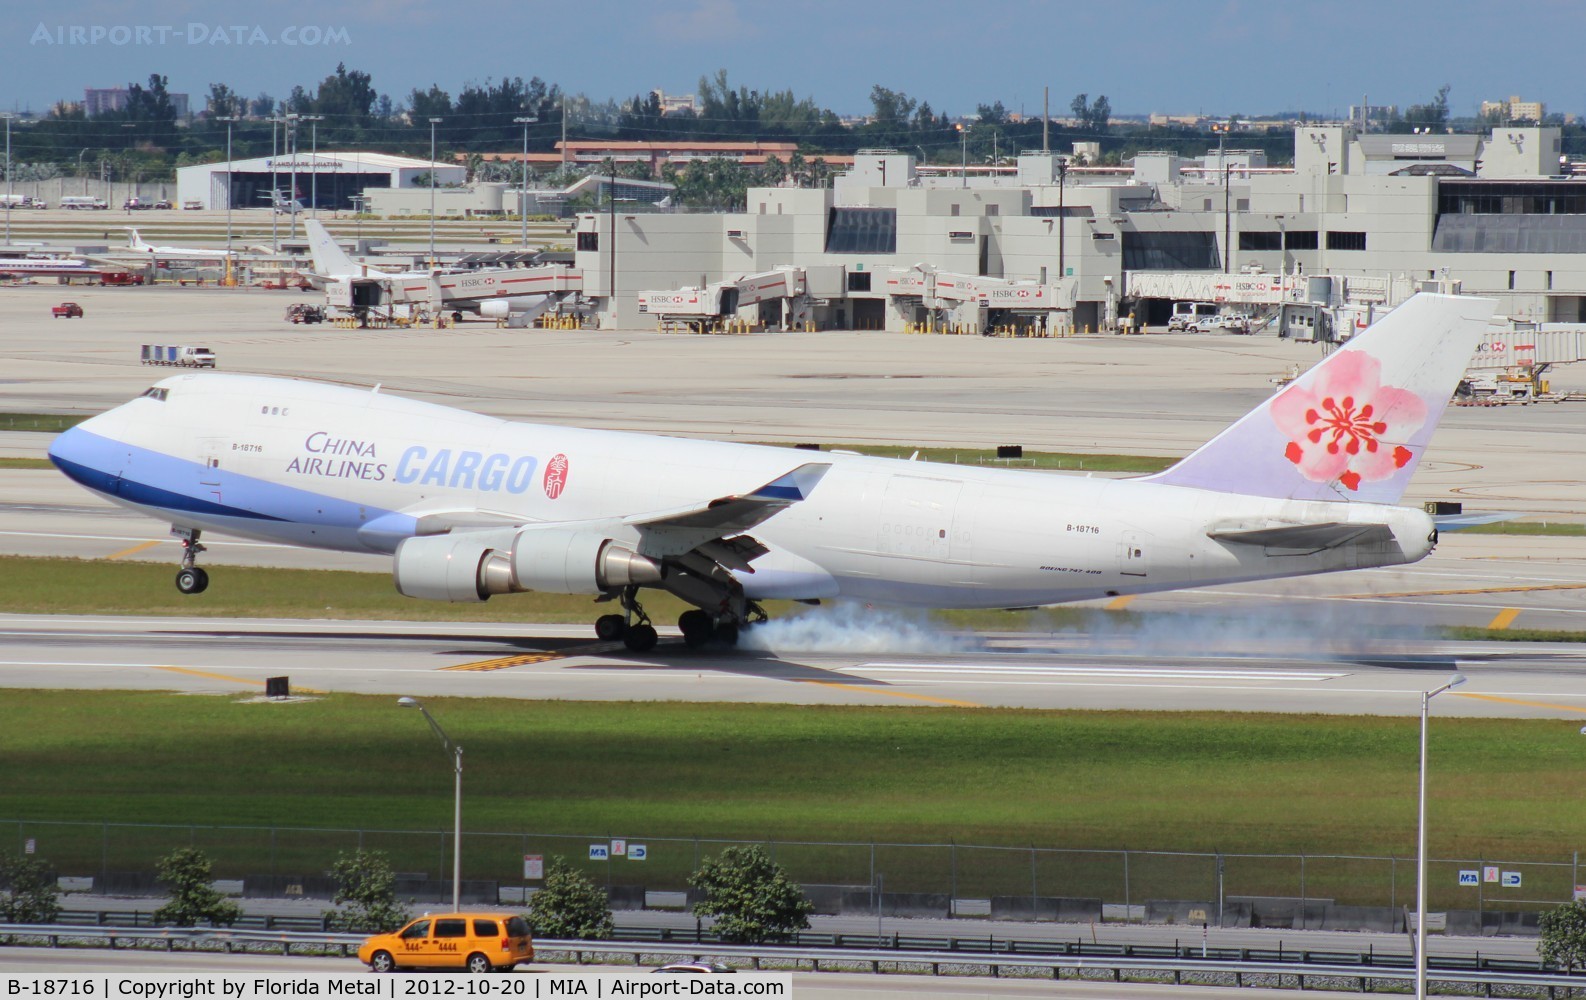 B-18716, 2003 Boeing 747-409F/SCD C/N 33732, China Airlines Cargo 747-400